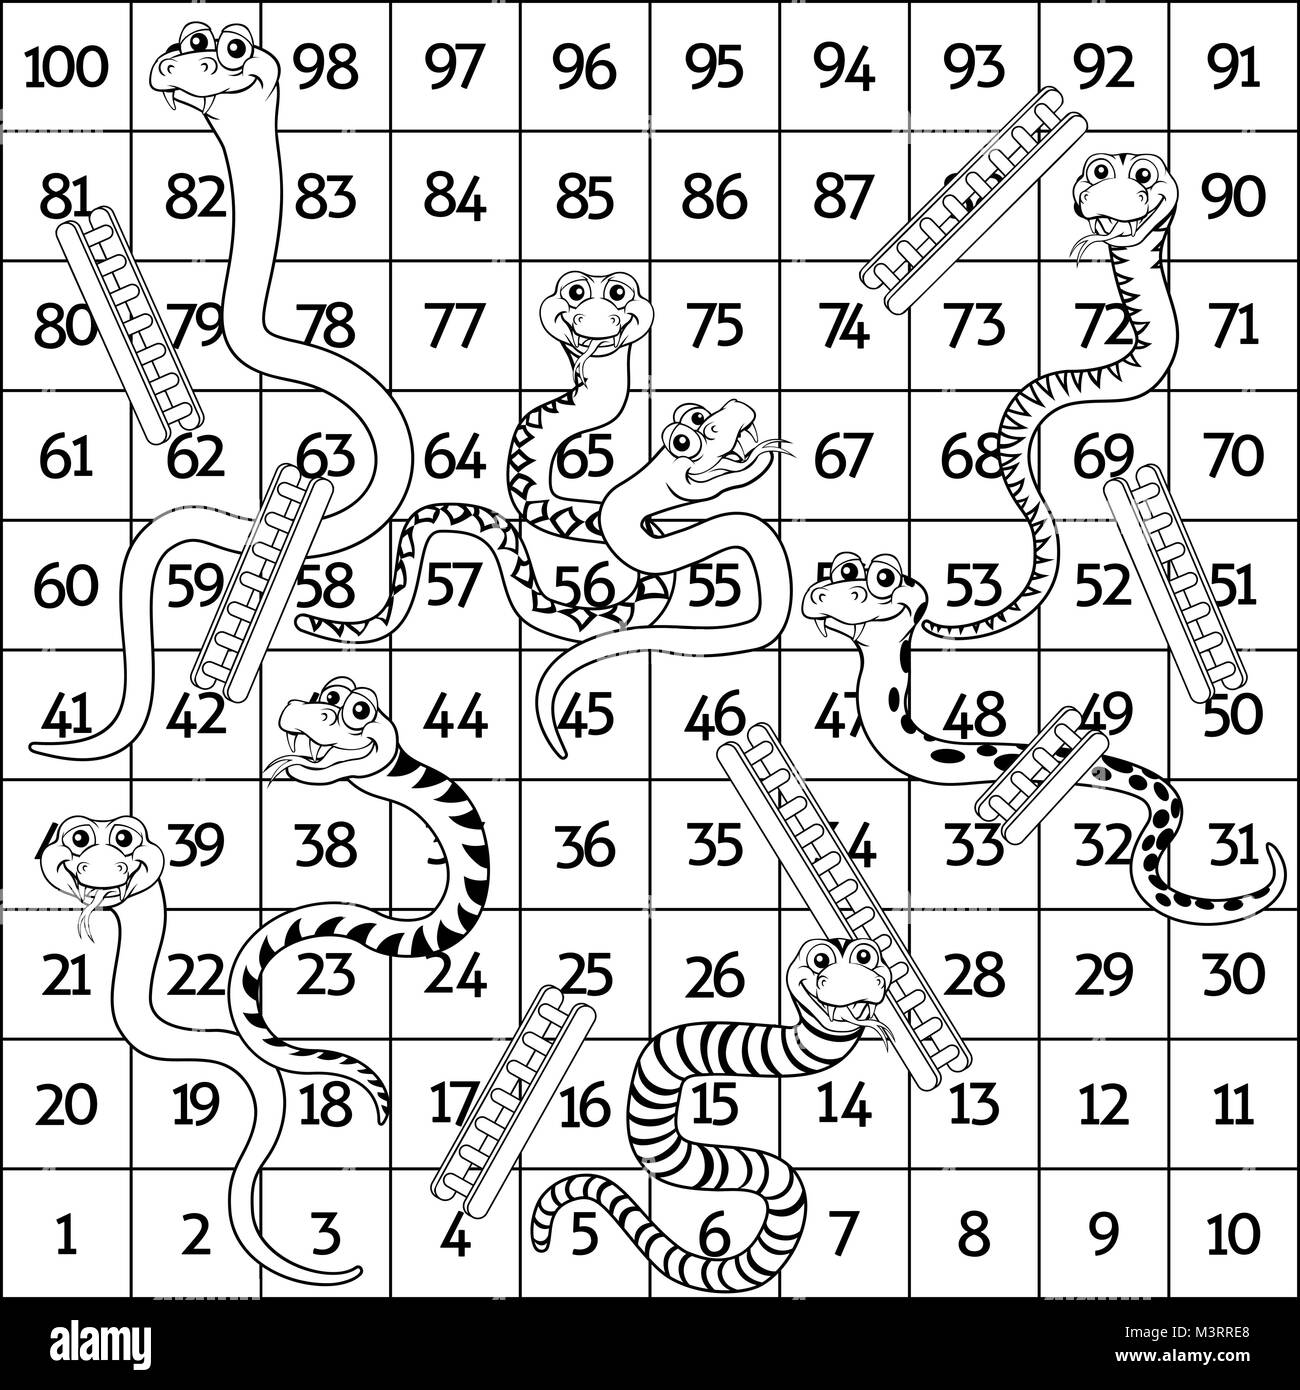 Snakes and ladders black and white stock vector image art